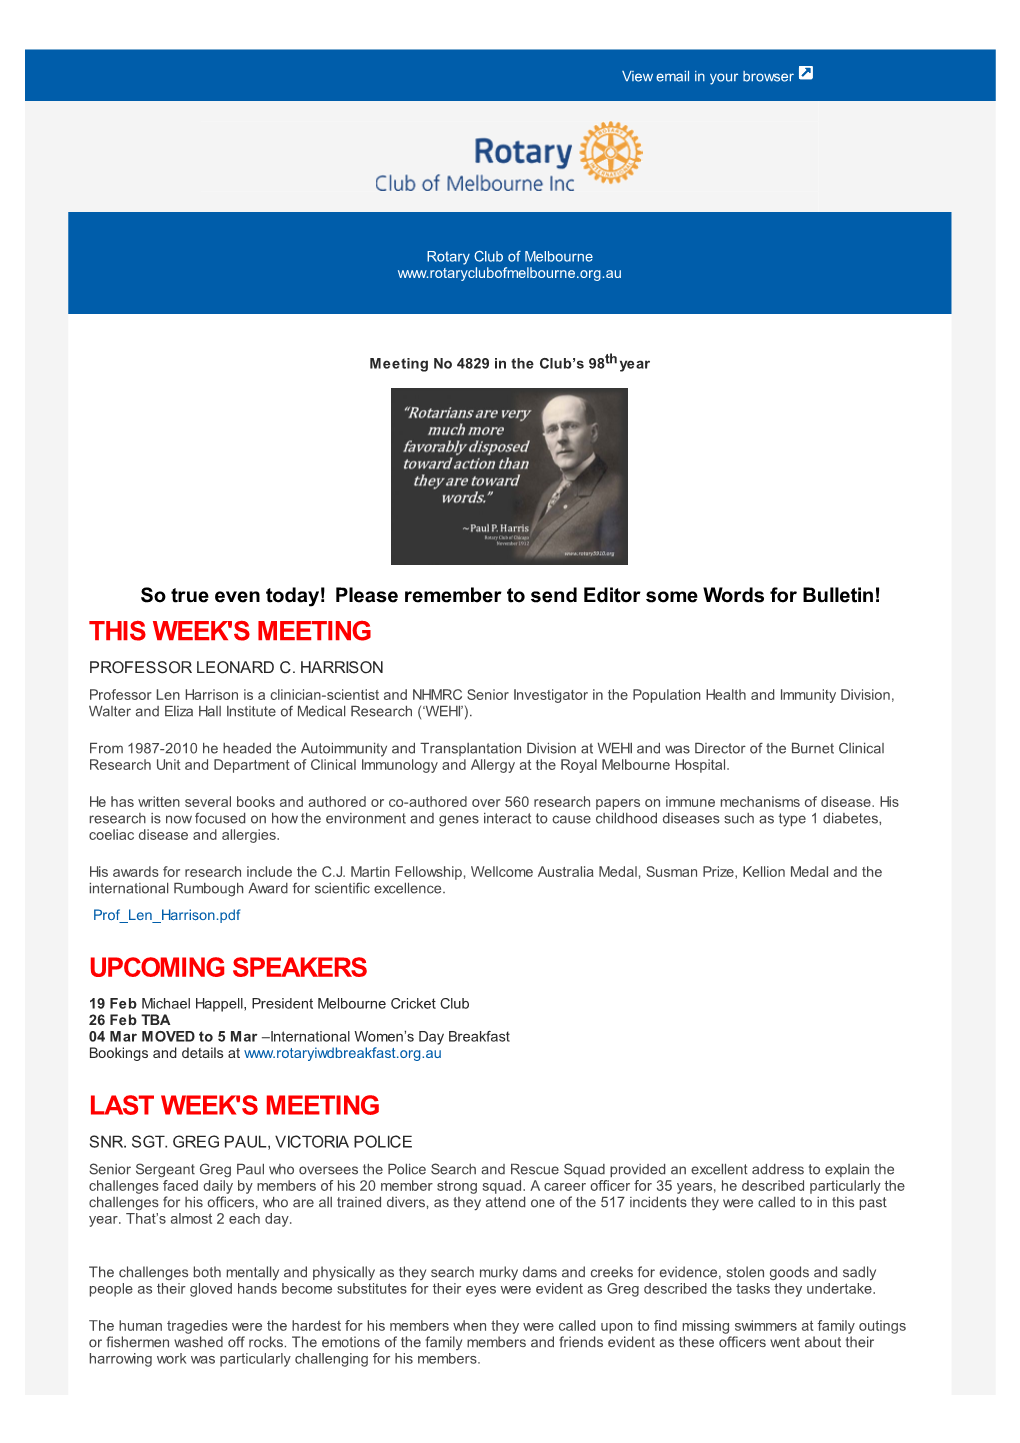 Rotary Club of Melbourne Newsletter